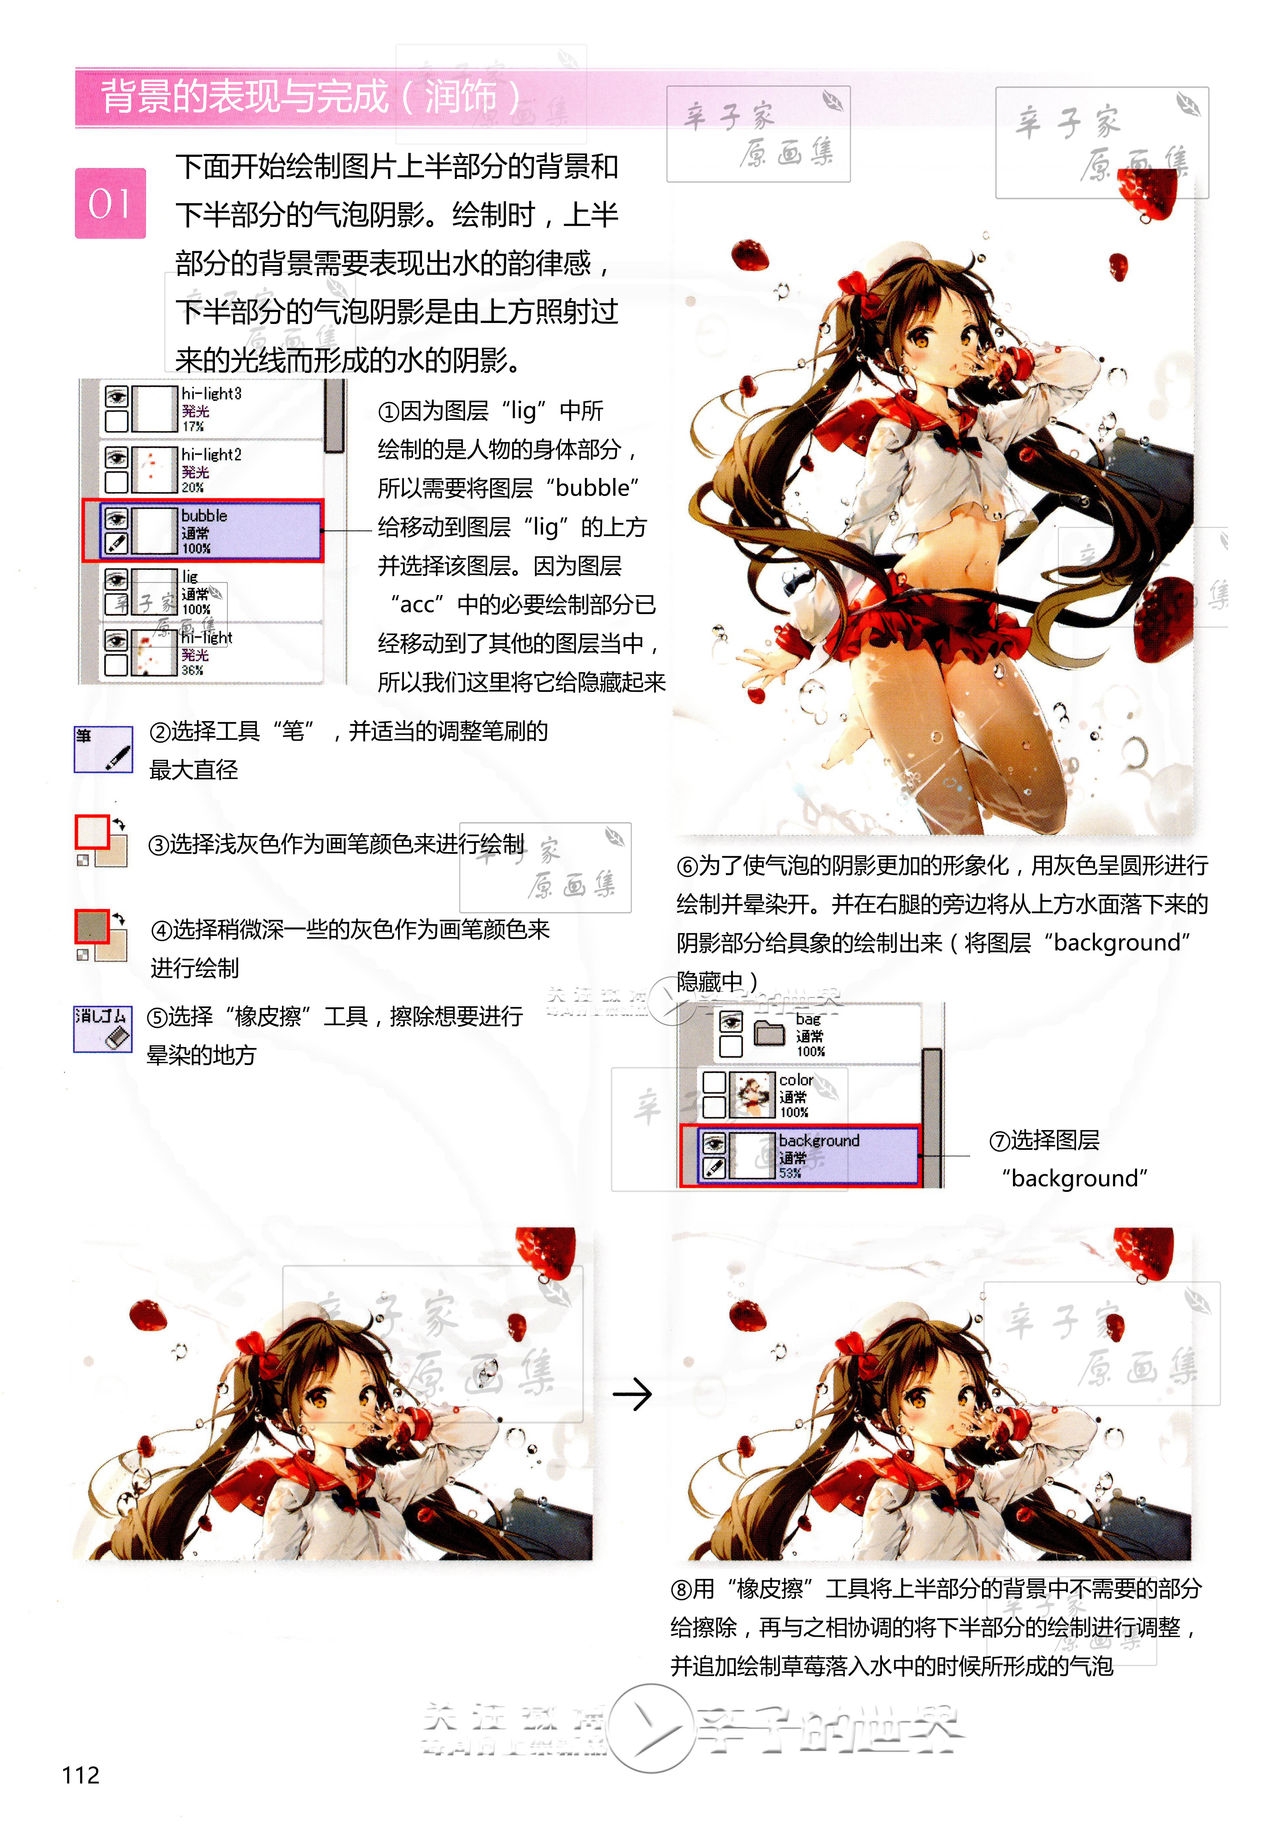 [Anmi] Lets Make ★ Character CG illustration techniques vol.9 [Chinese] 110